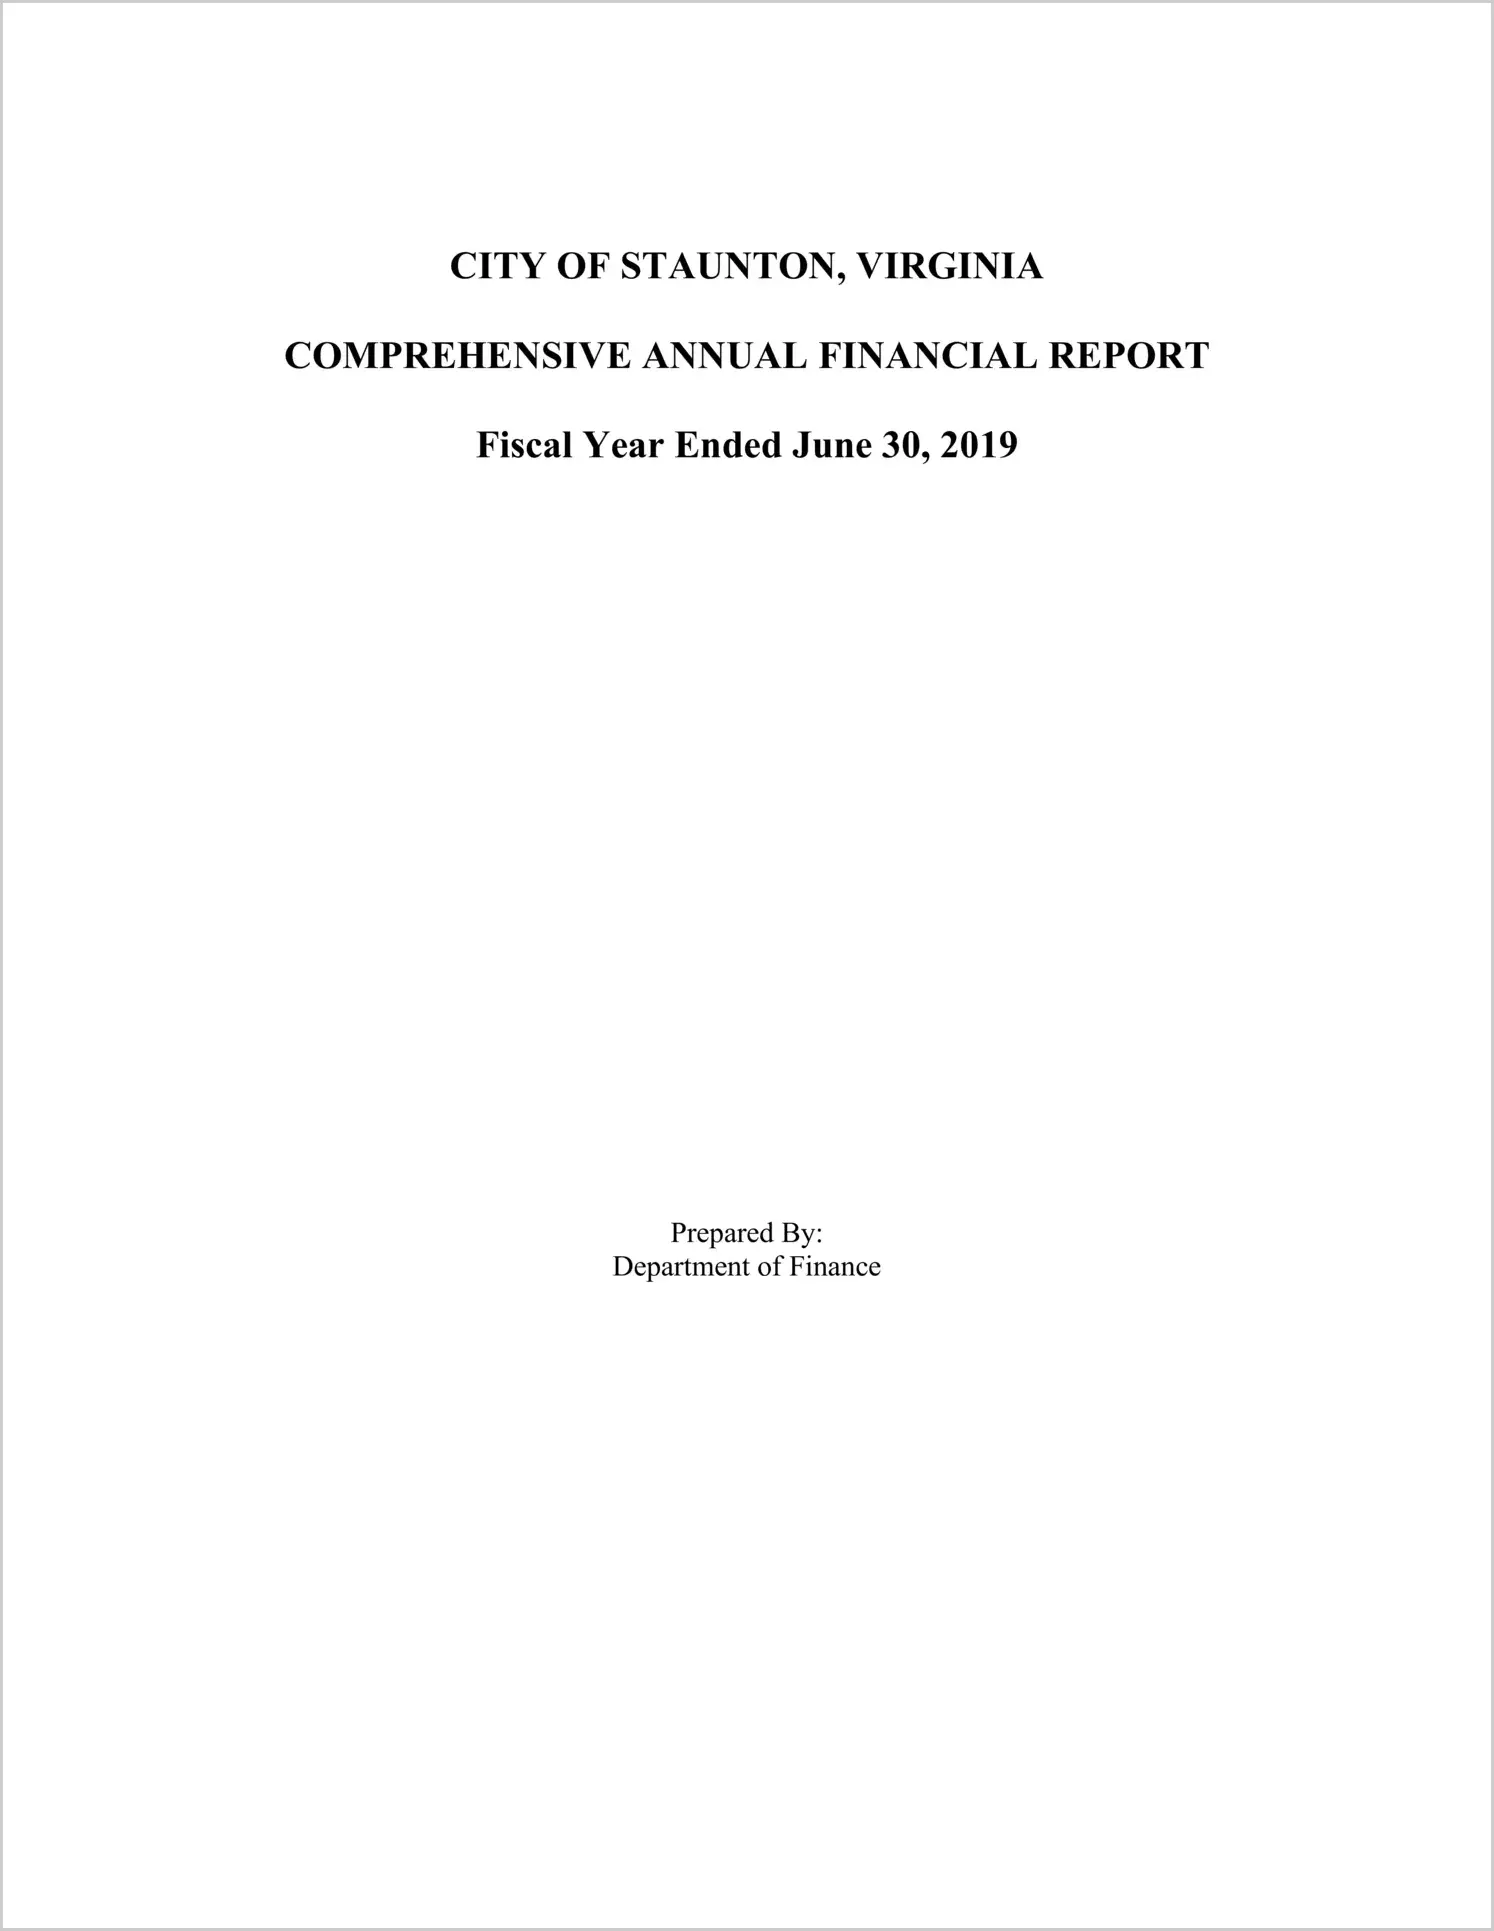 2019 Annual Financial Report for City of Staunton